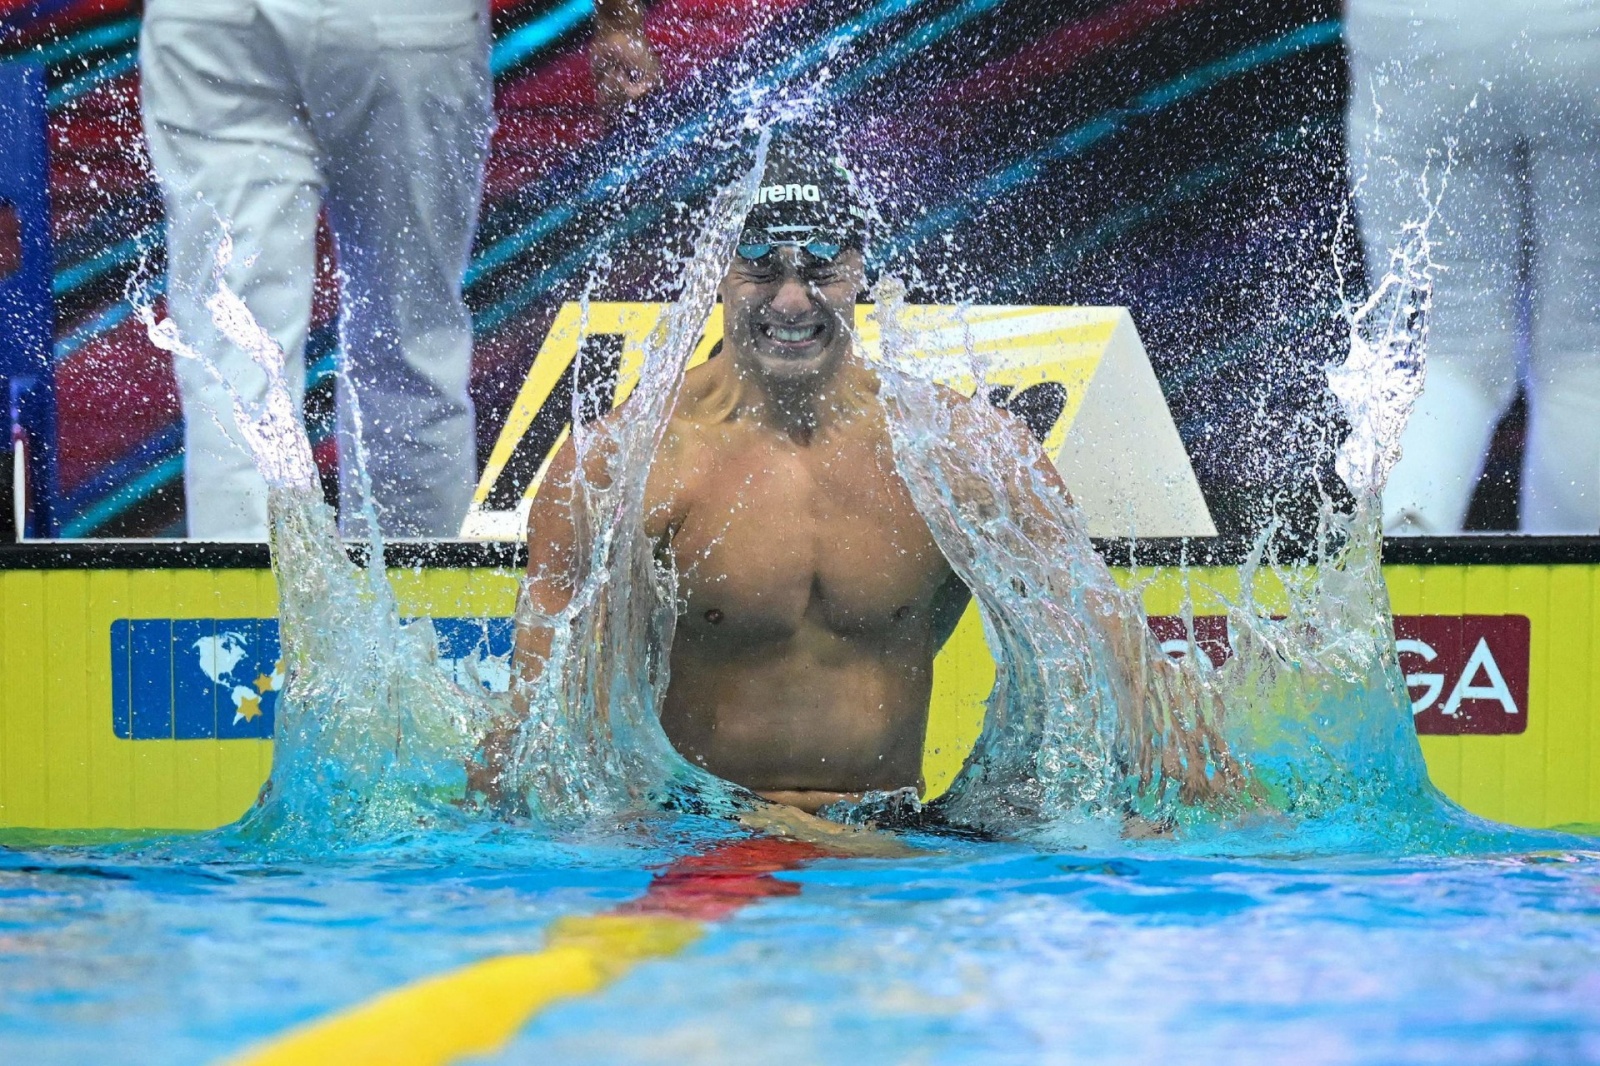 Italy's Nicolo Martinenghi celebrates taking gold in the men's 100m breaststroke finals the Budapest 2022 World Aquatics Championships at Duna Arena in Budapest on June 19, 2022. (Photo by Ferenc ISZA / AFP)